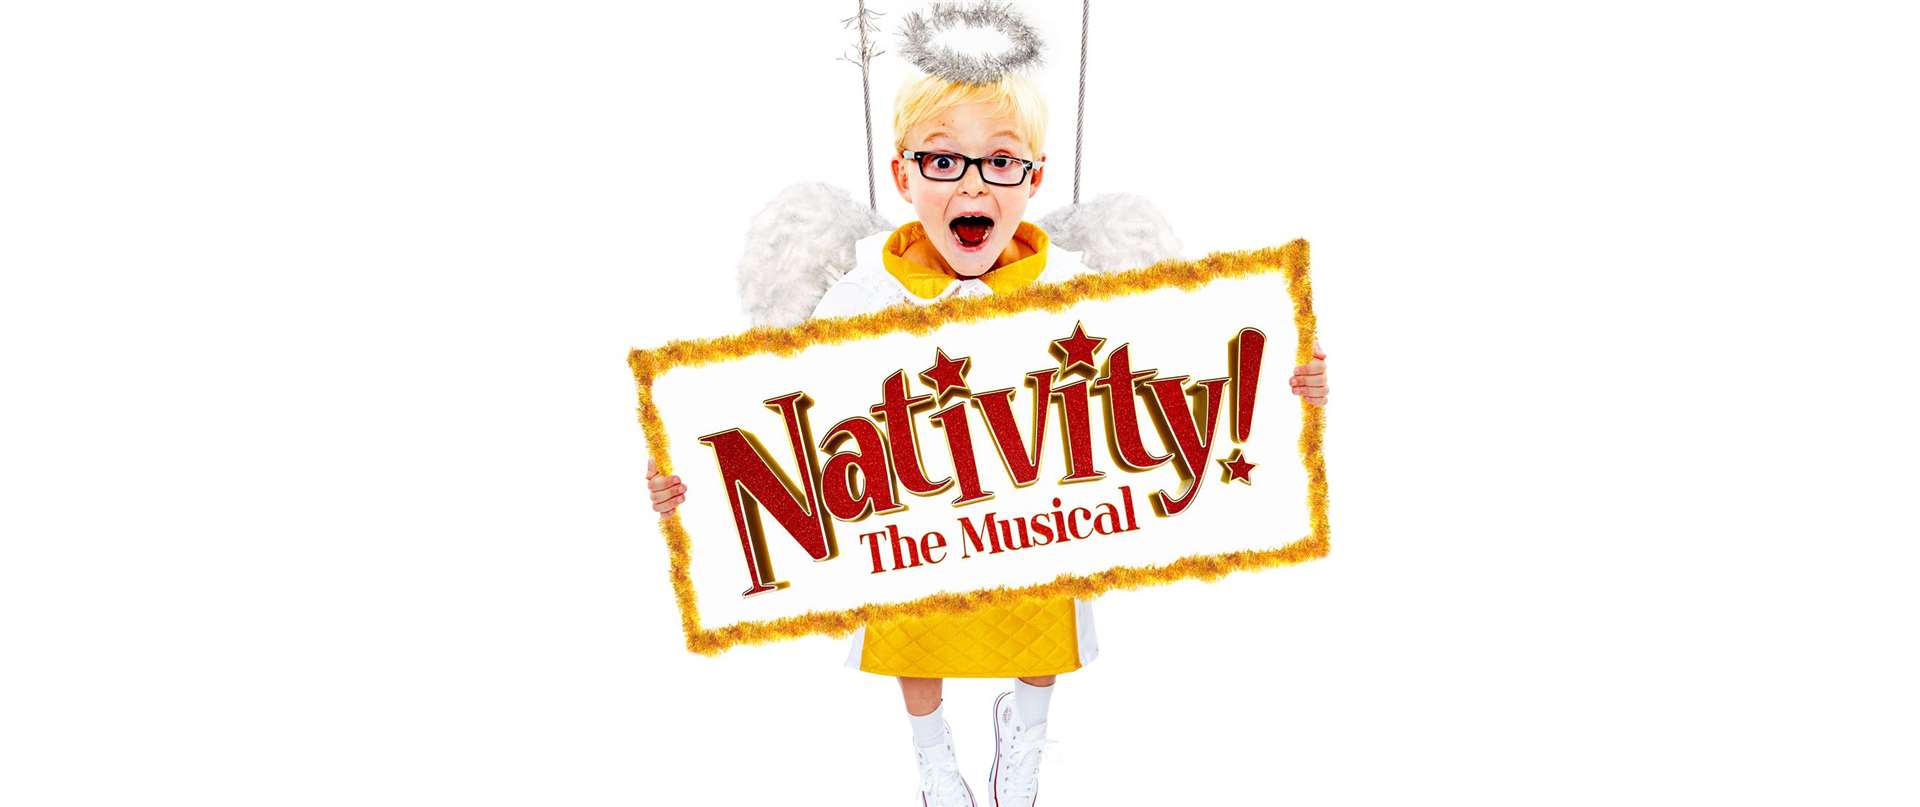 Nativity! the Musical is coming to Kent later this year